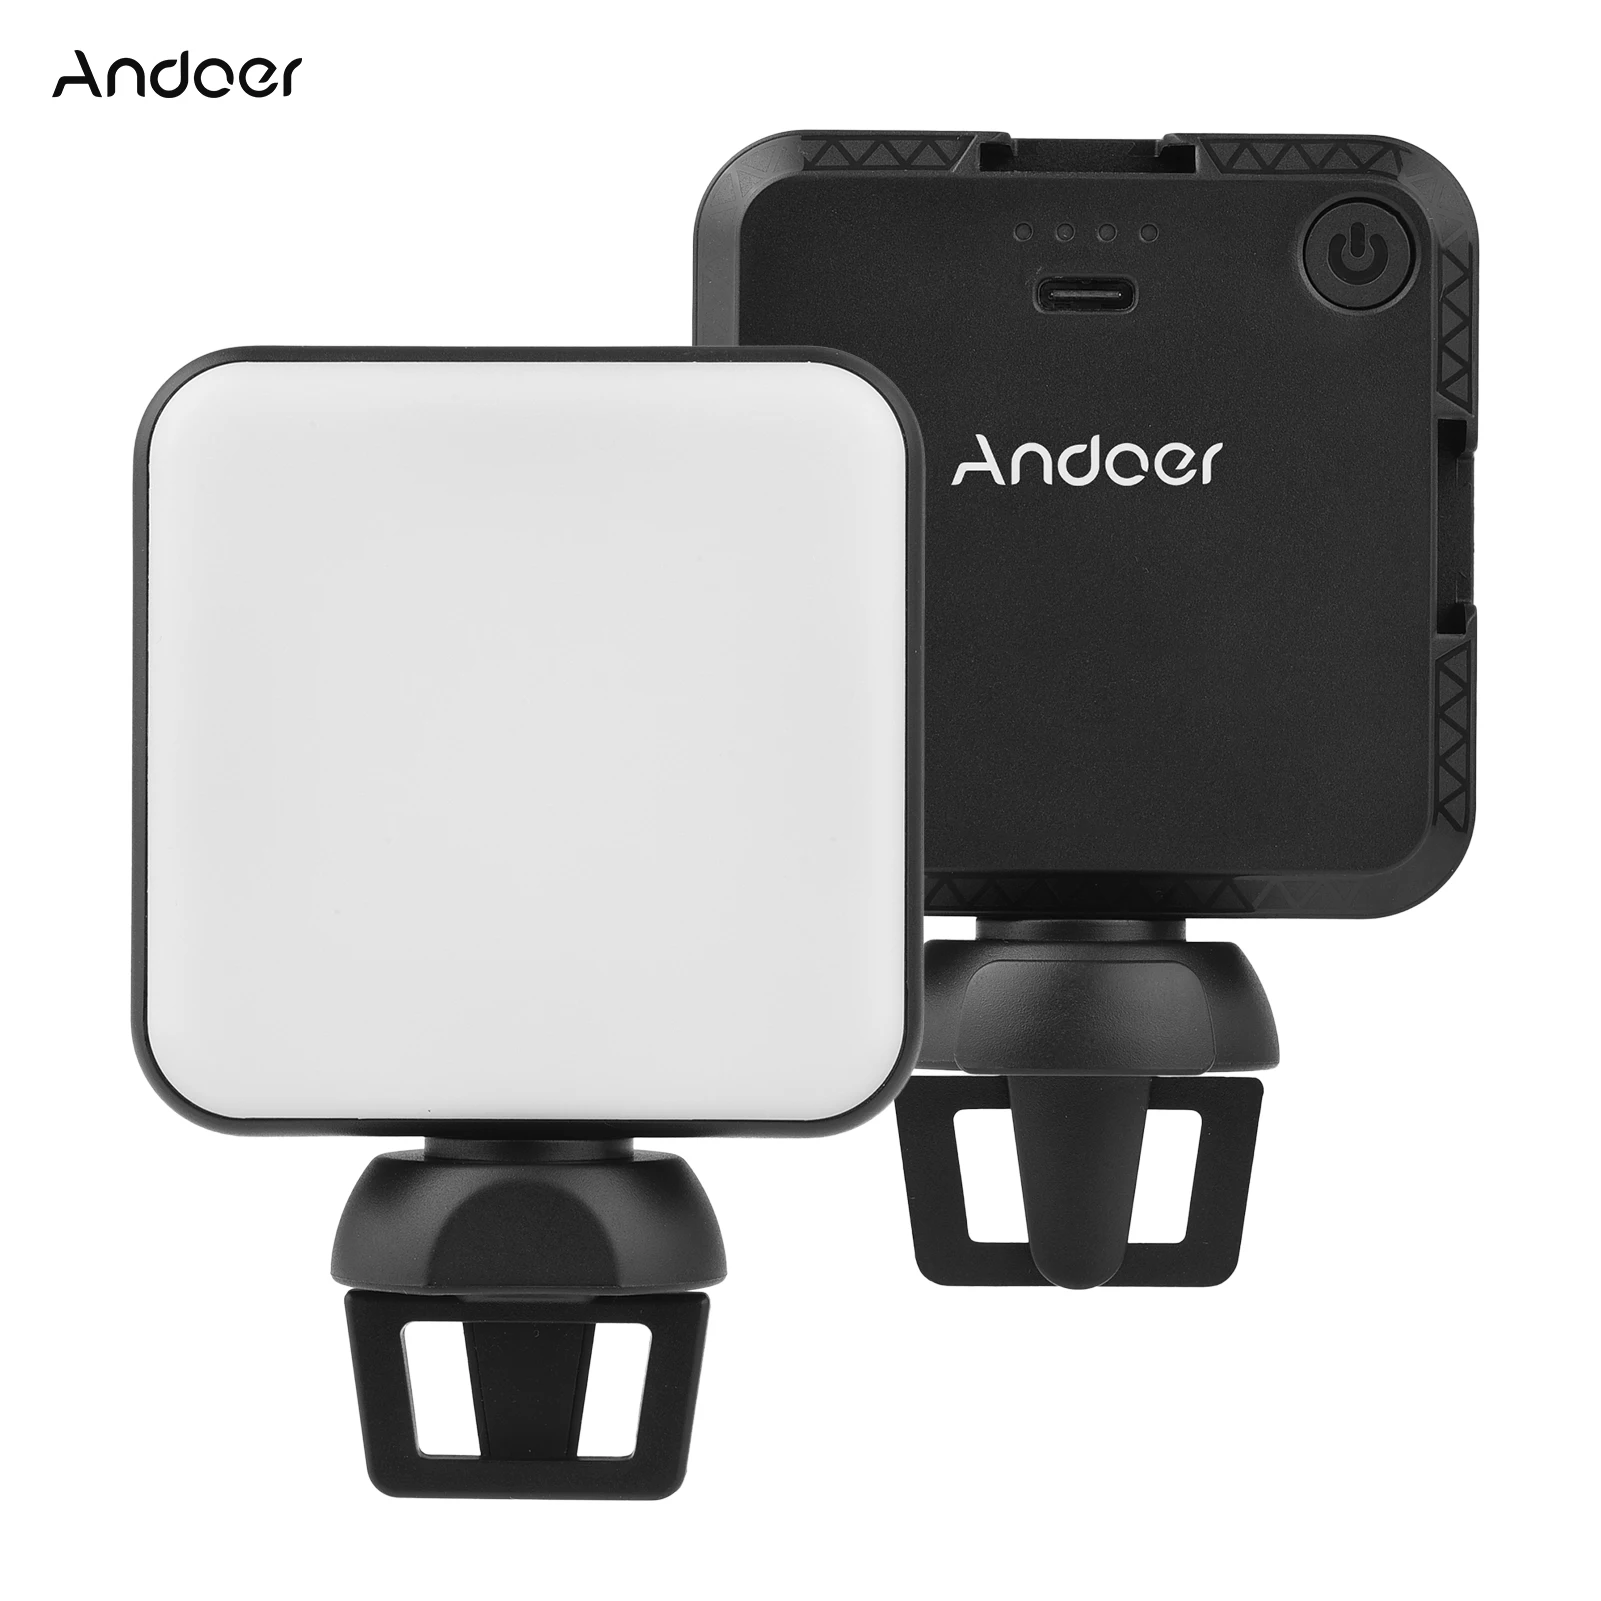 

Andoer W36 Mini LED Video Light Portable Photography Light with 5600K Color Temperature Adjustable Brightness 3 Cold Shoe Mount